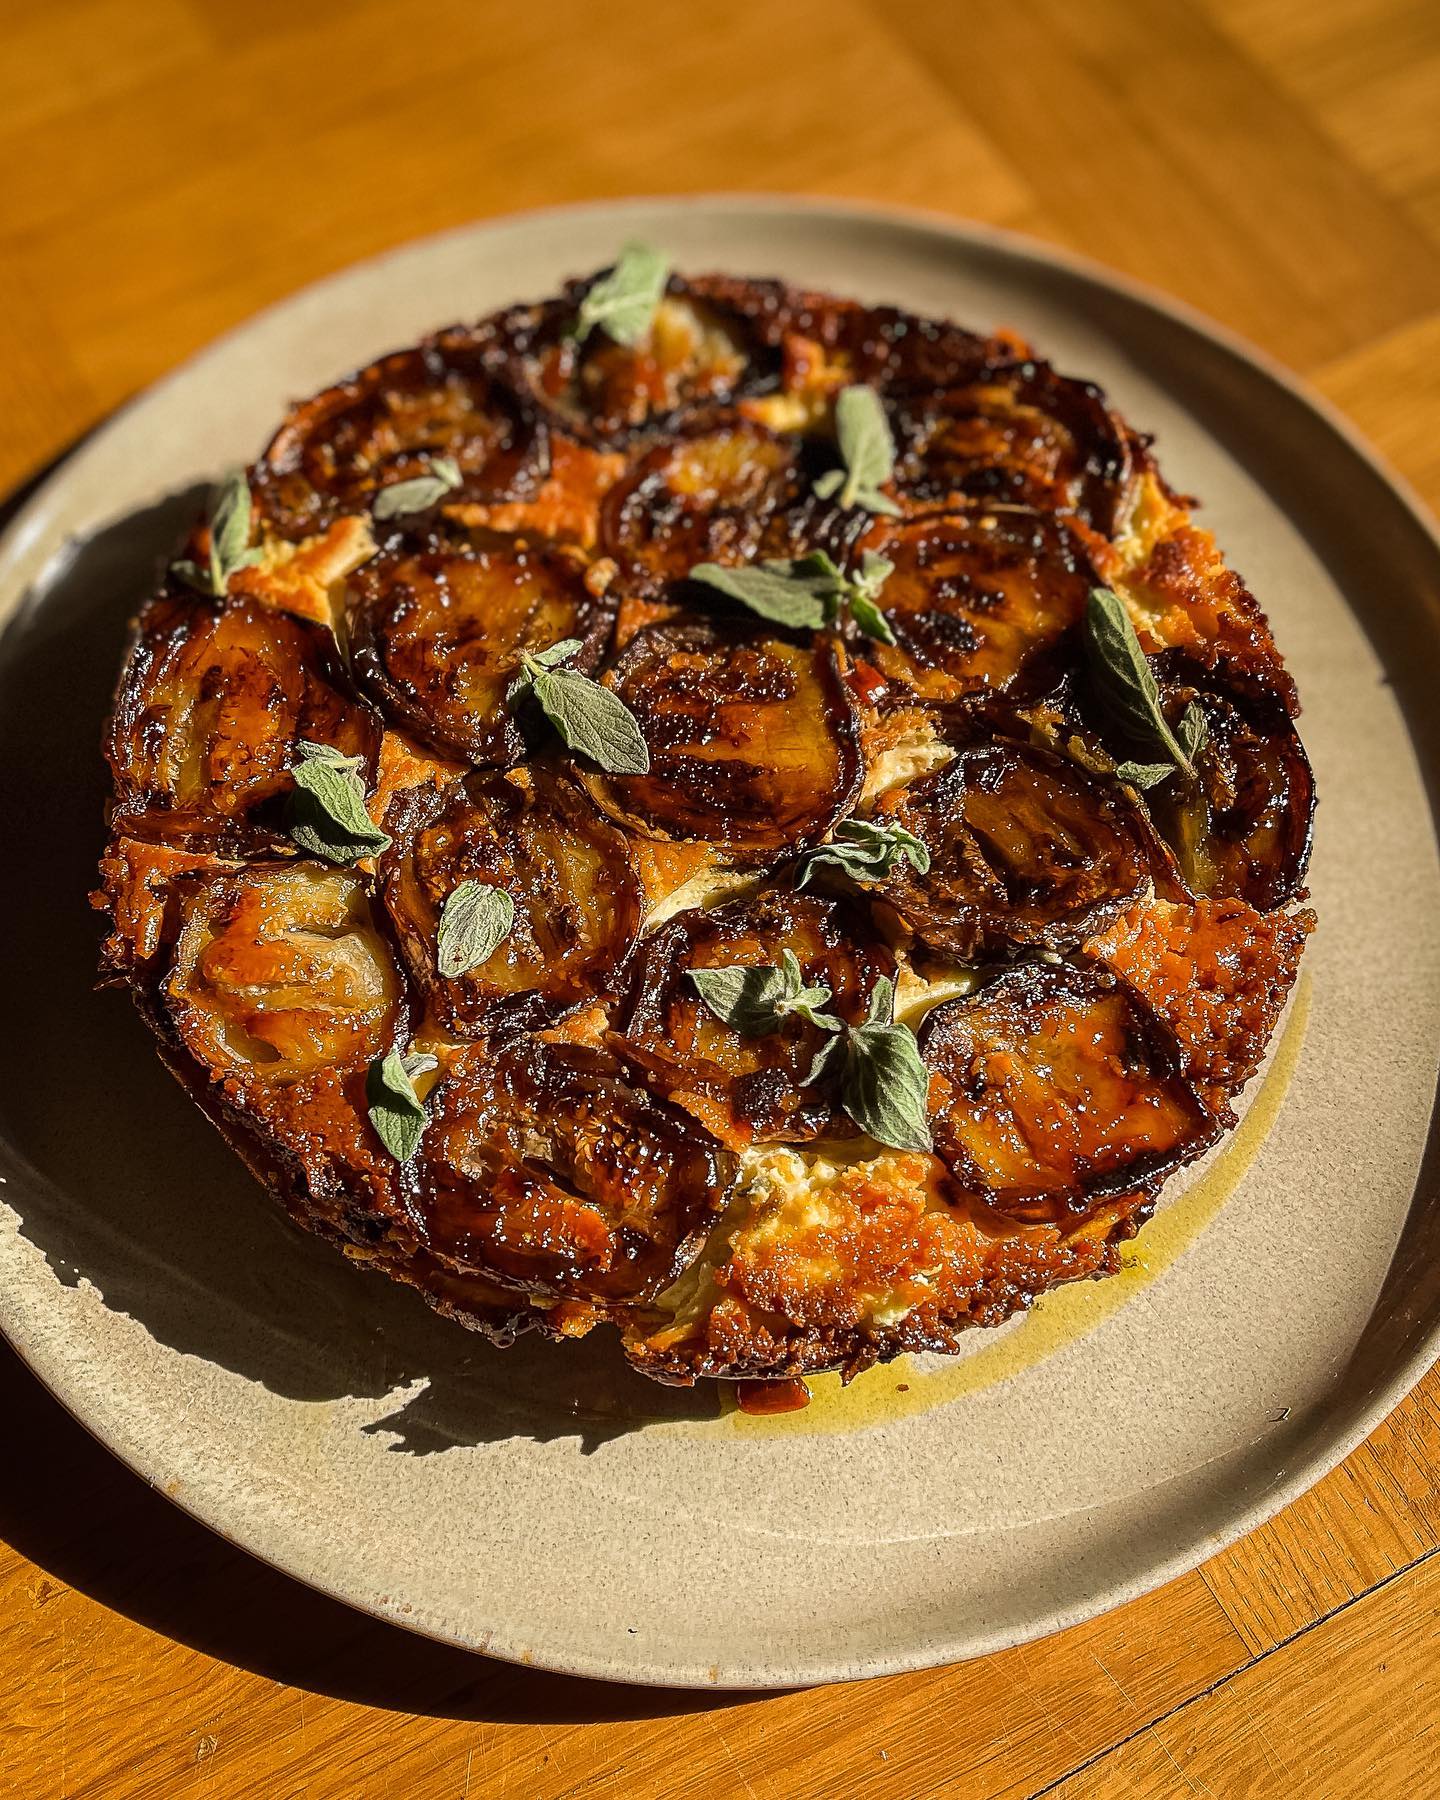 We made a saganaki-inspired-eggplant-feta-tarte-tartin with filo, hot honey, and oregano. The tarte is long gone but the recipe is coming soon. 
.
.
#tartetatin #eggplant #saganaki #recipeoftheday #feta #fetacheese #hothoney #filo #tarte #recipes #oregano